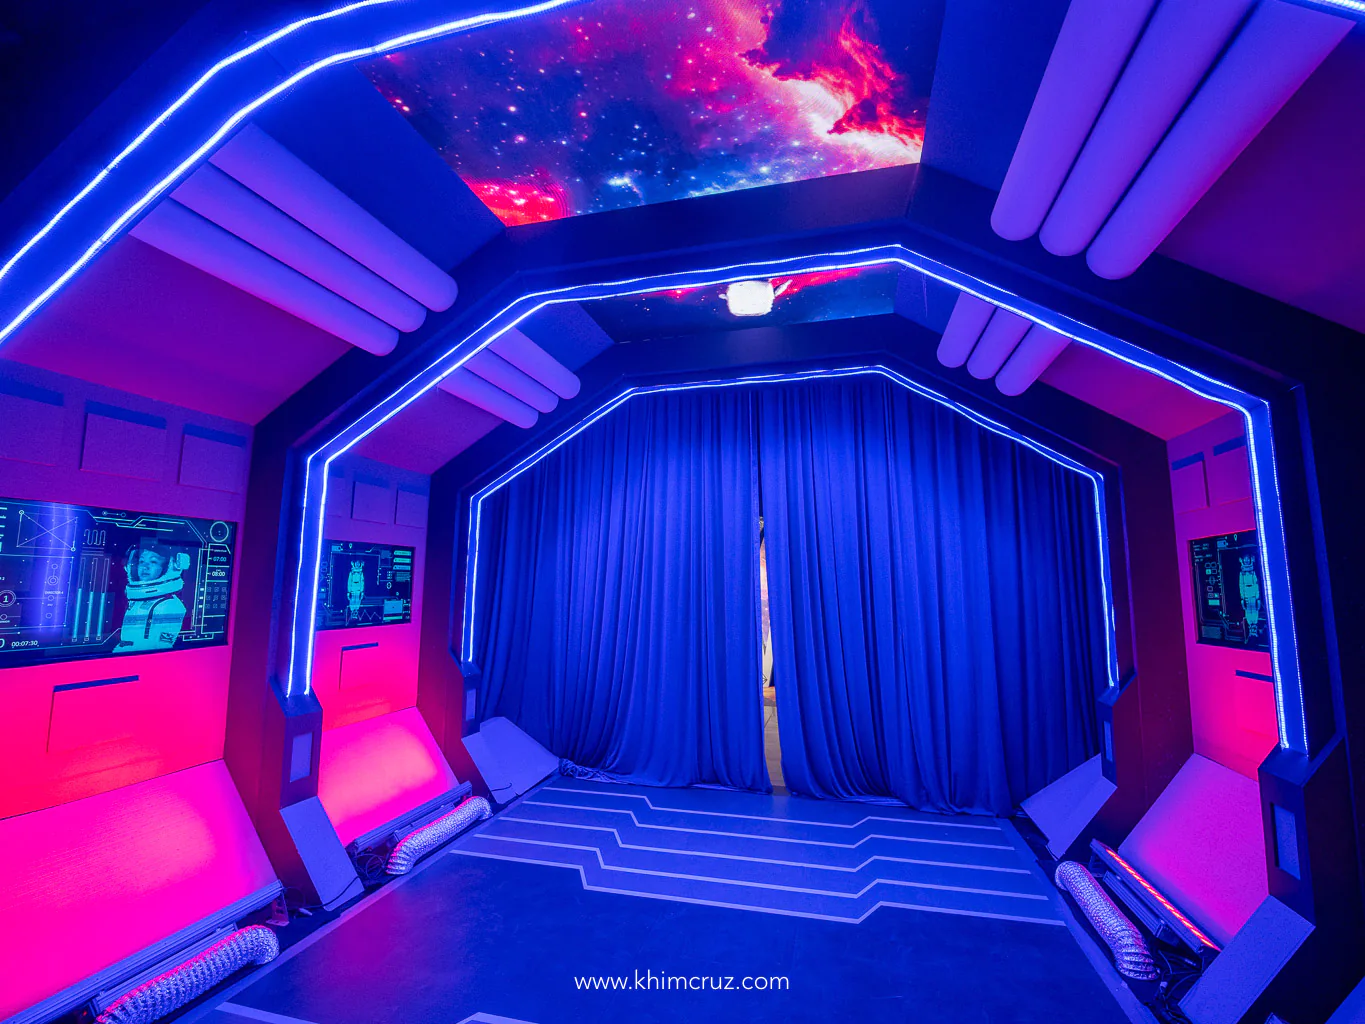 spacecraft tunnel featuring wall visual overlay screens and dynamic ceiling showcasing outer space vistas